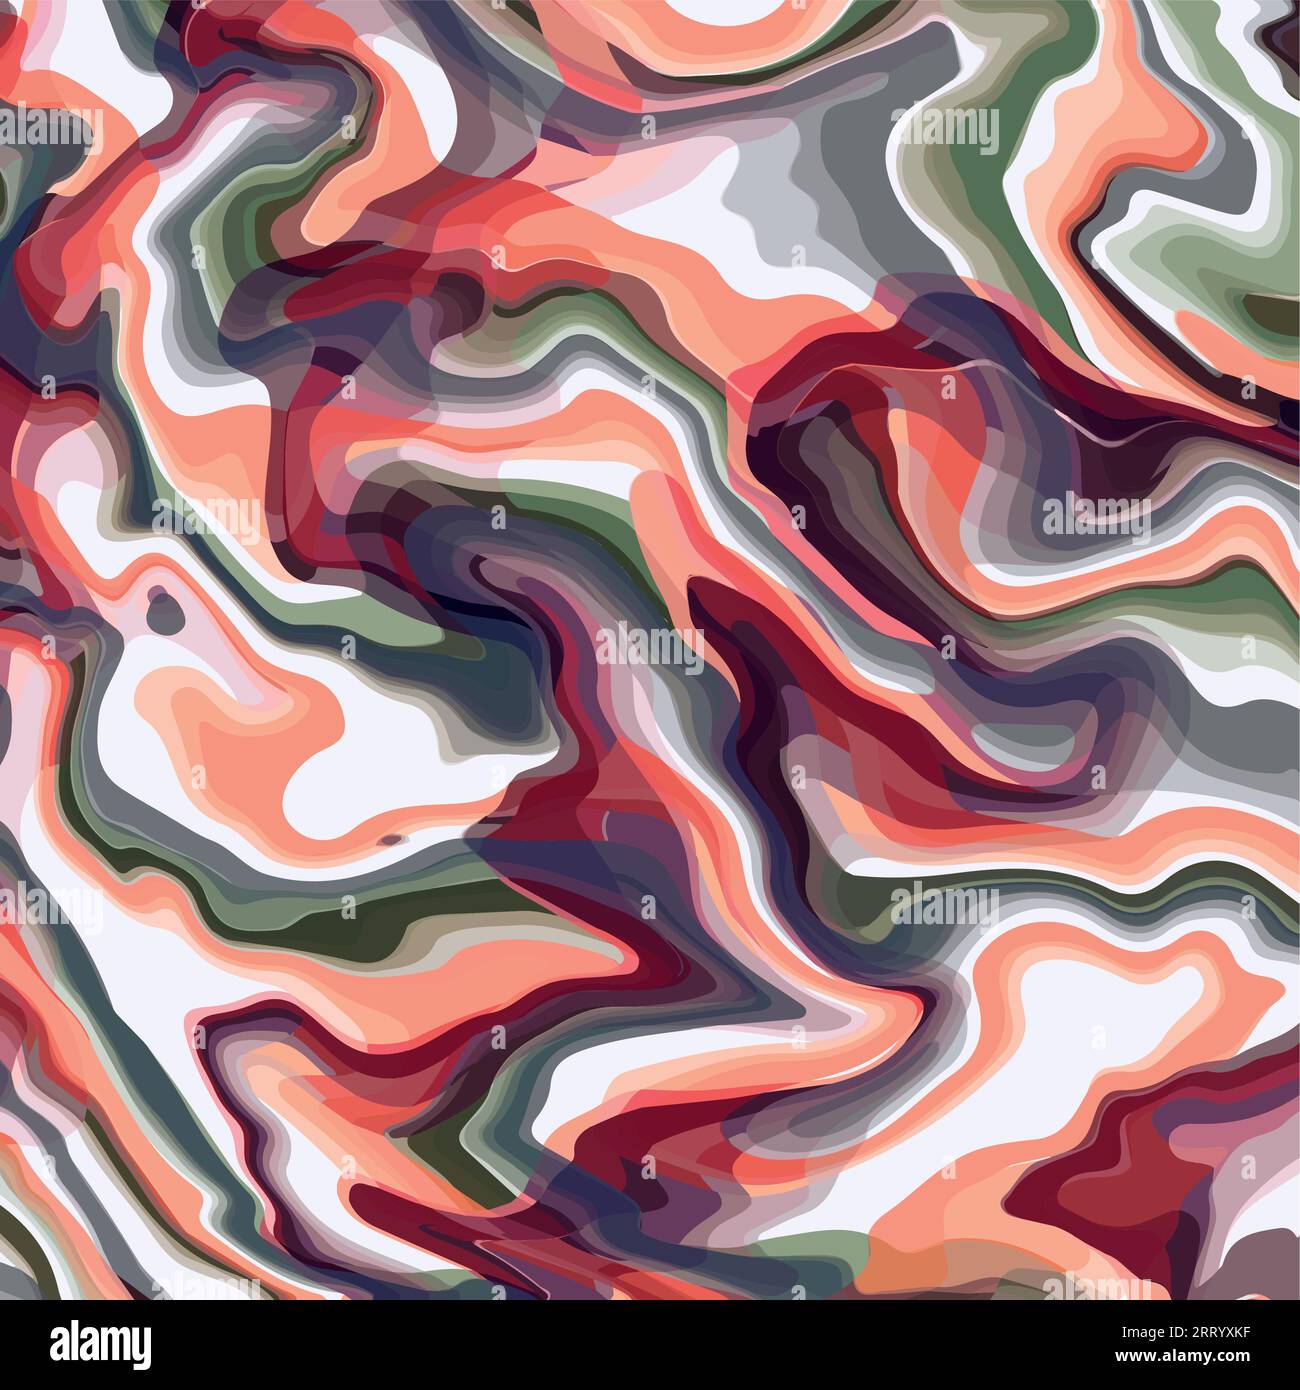 Modern colorful liquid wave background vector. wallpaper, marbling effect, vector illustration, fashion, interior Stock Vector